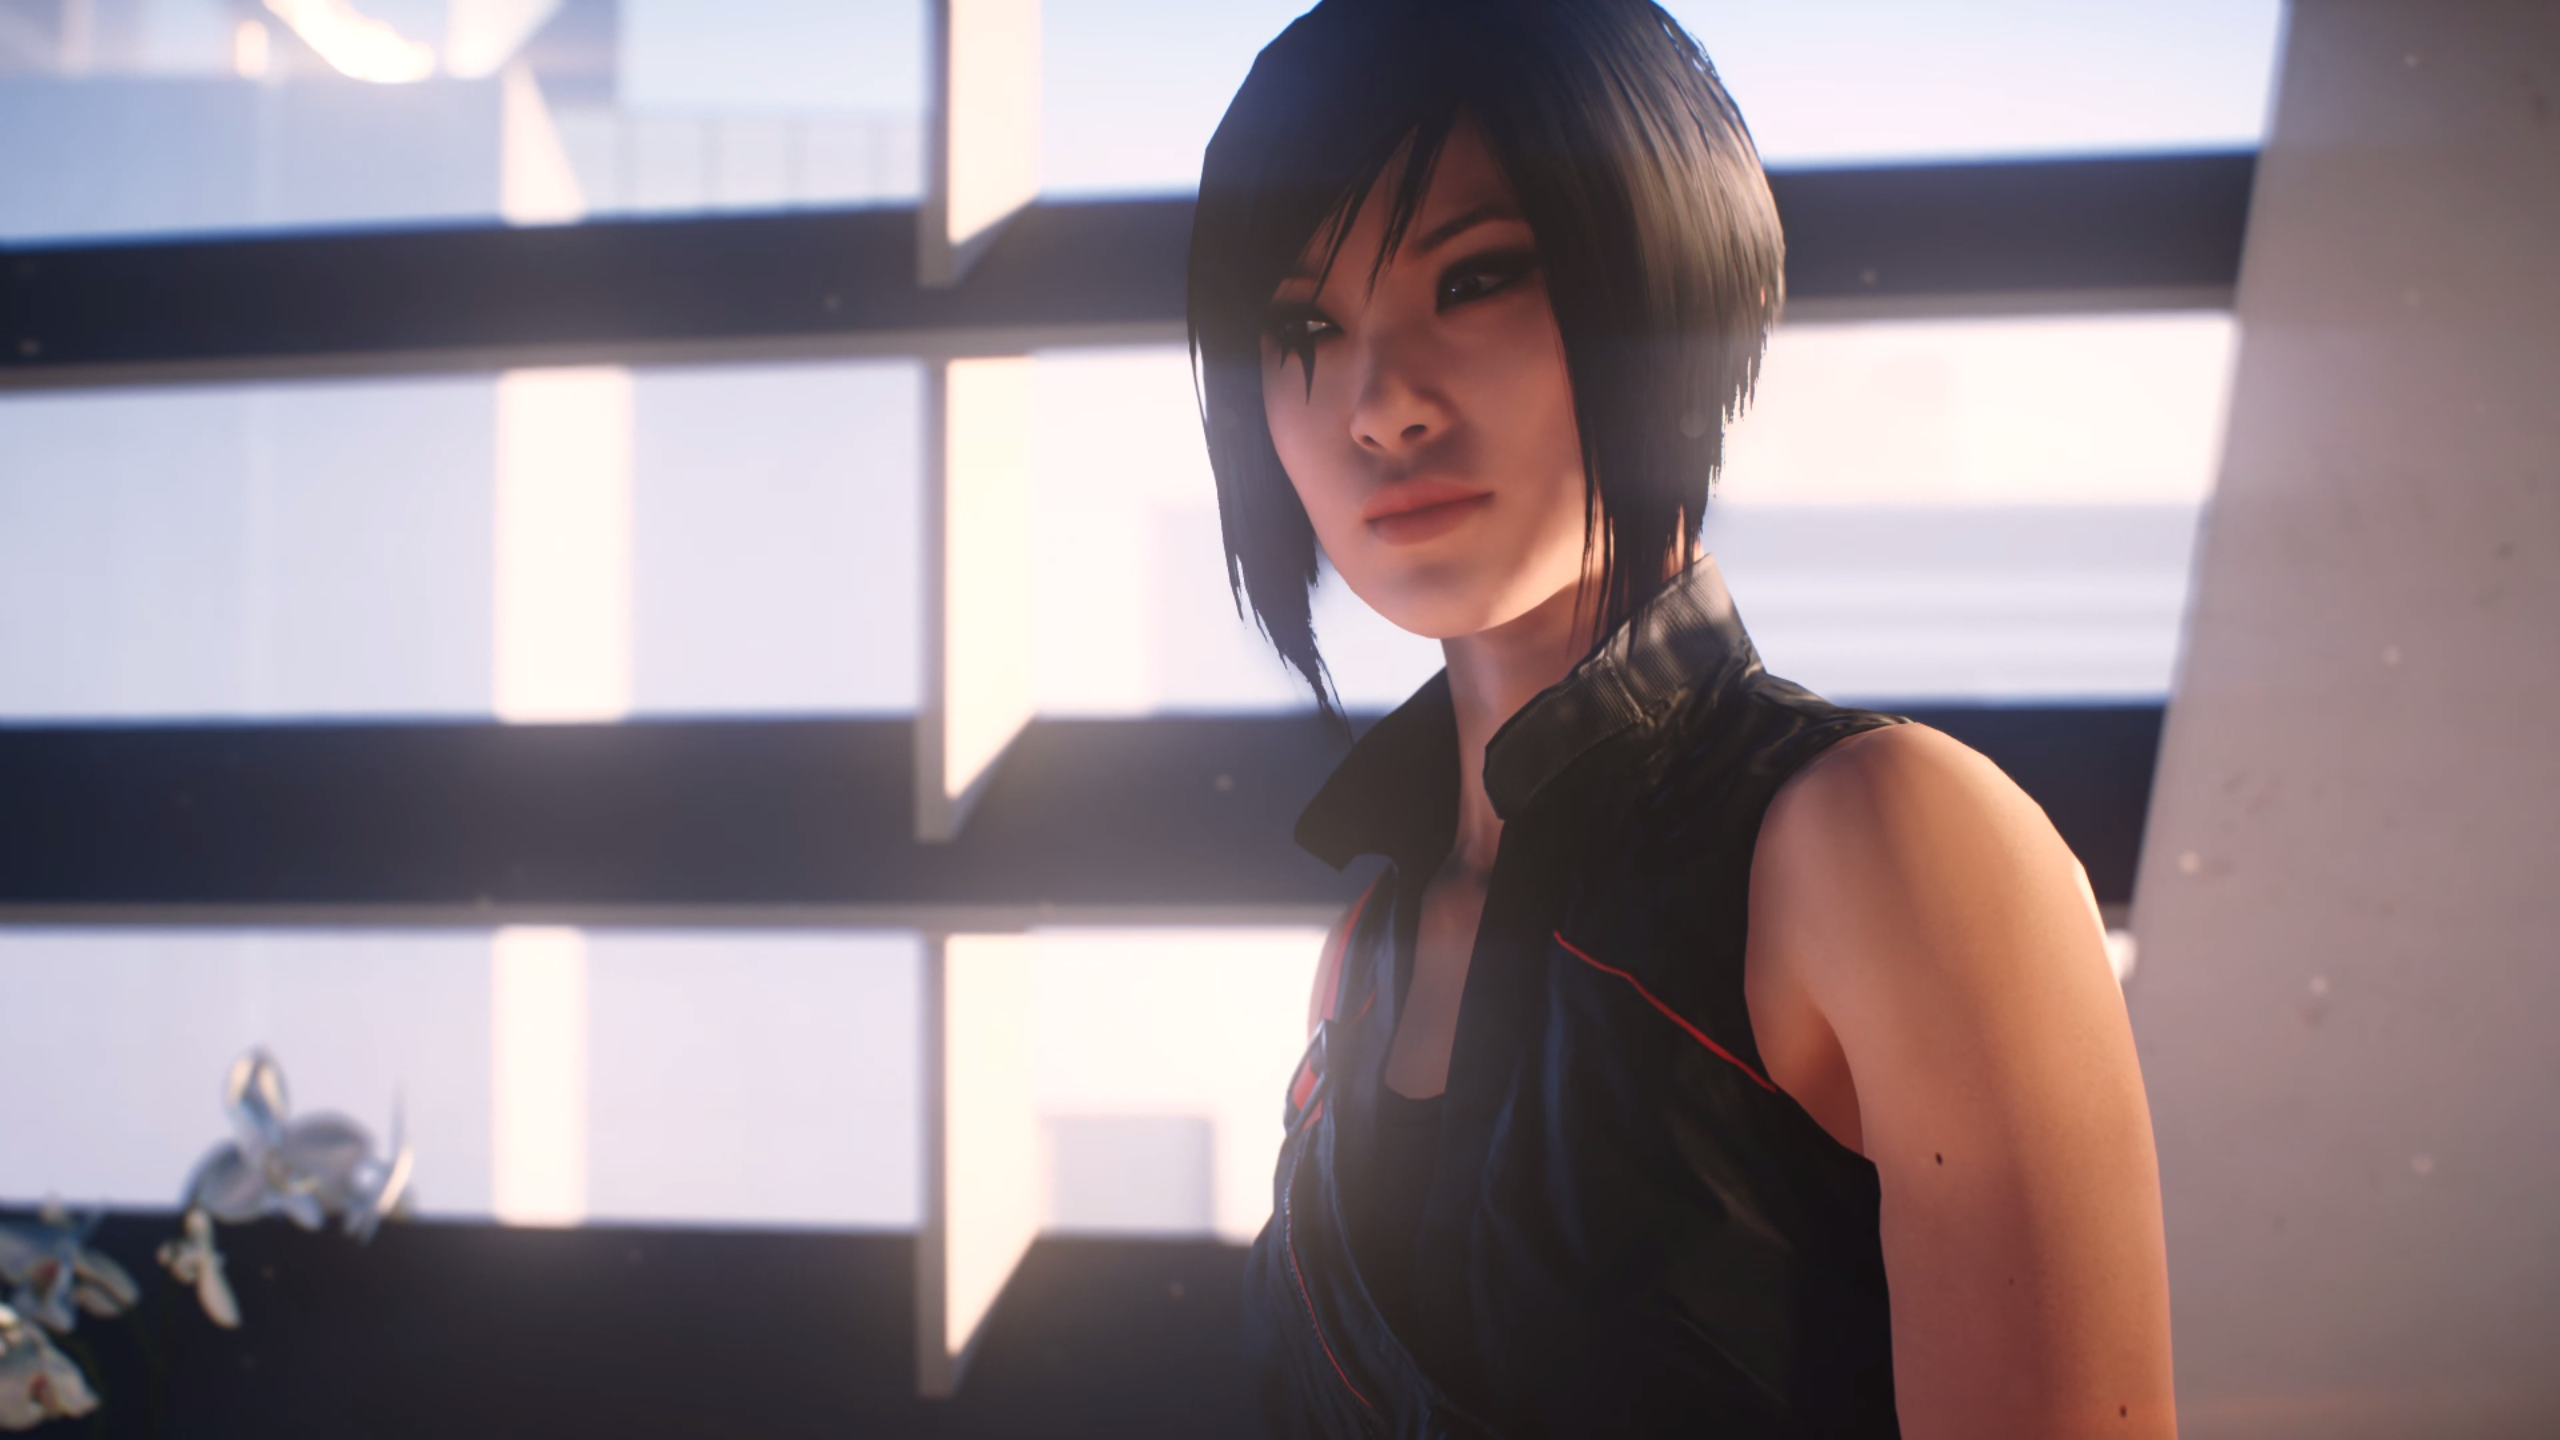 General 2560x1440 Faith Connors Mirror's Edge Catalyst video games fictional character screen shot video game girls dark hair women video game characters EA DICE Electronic Arts